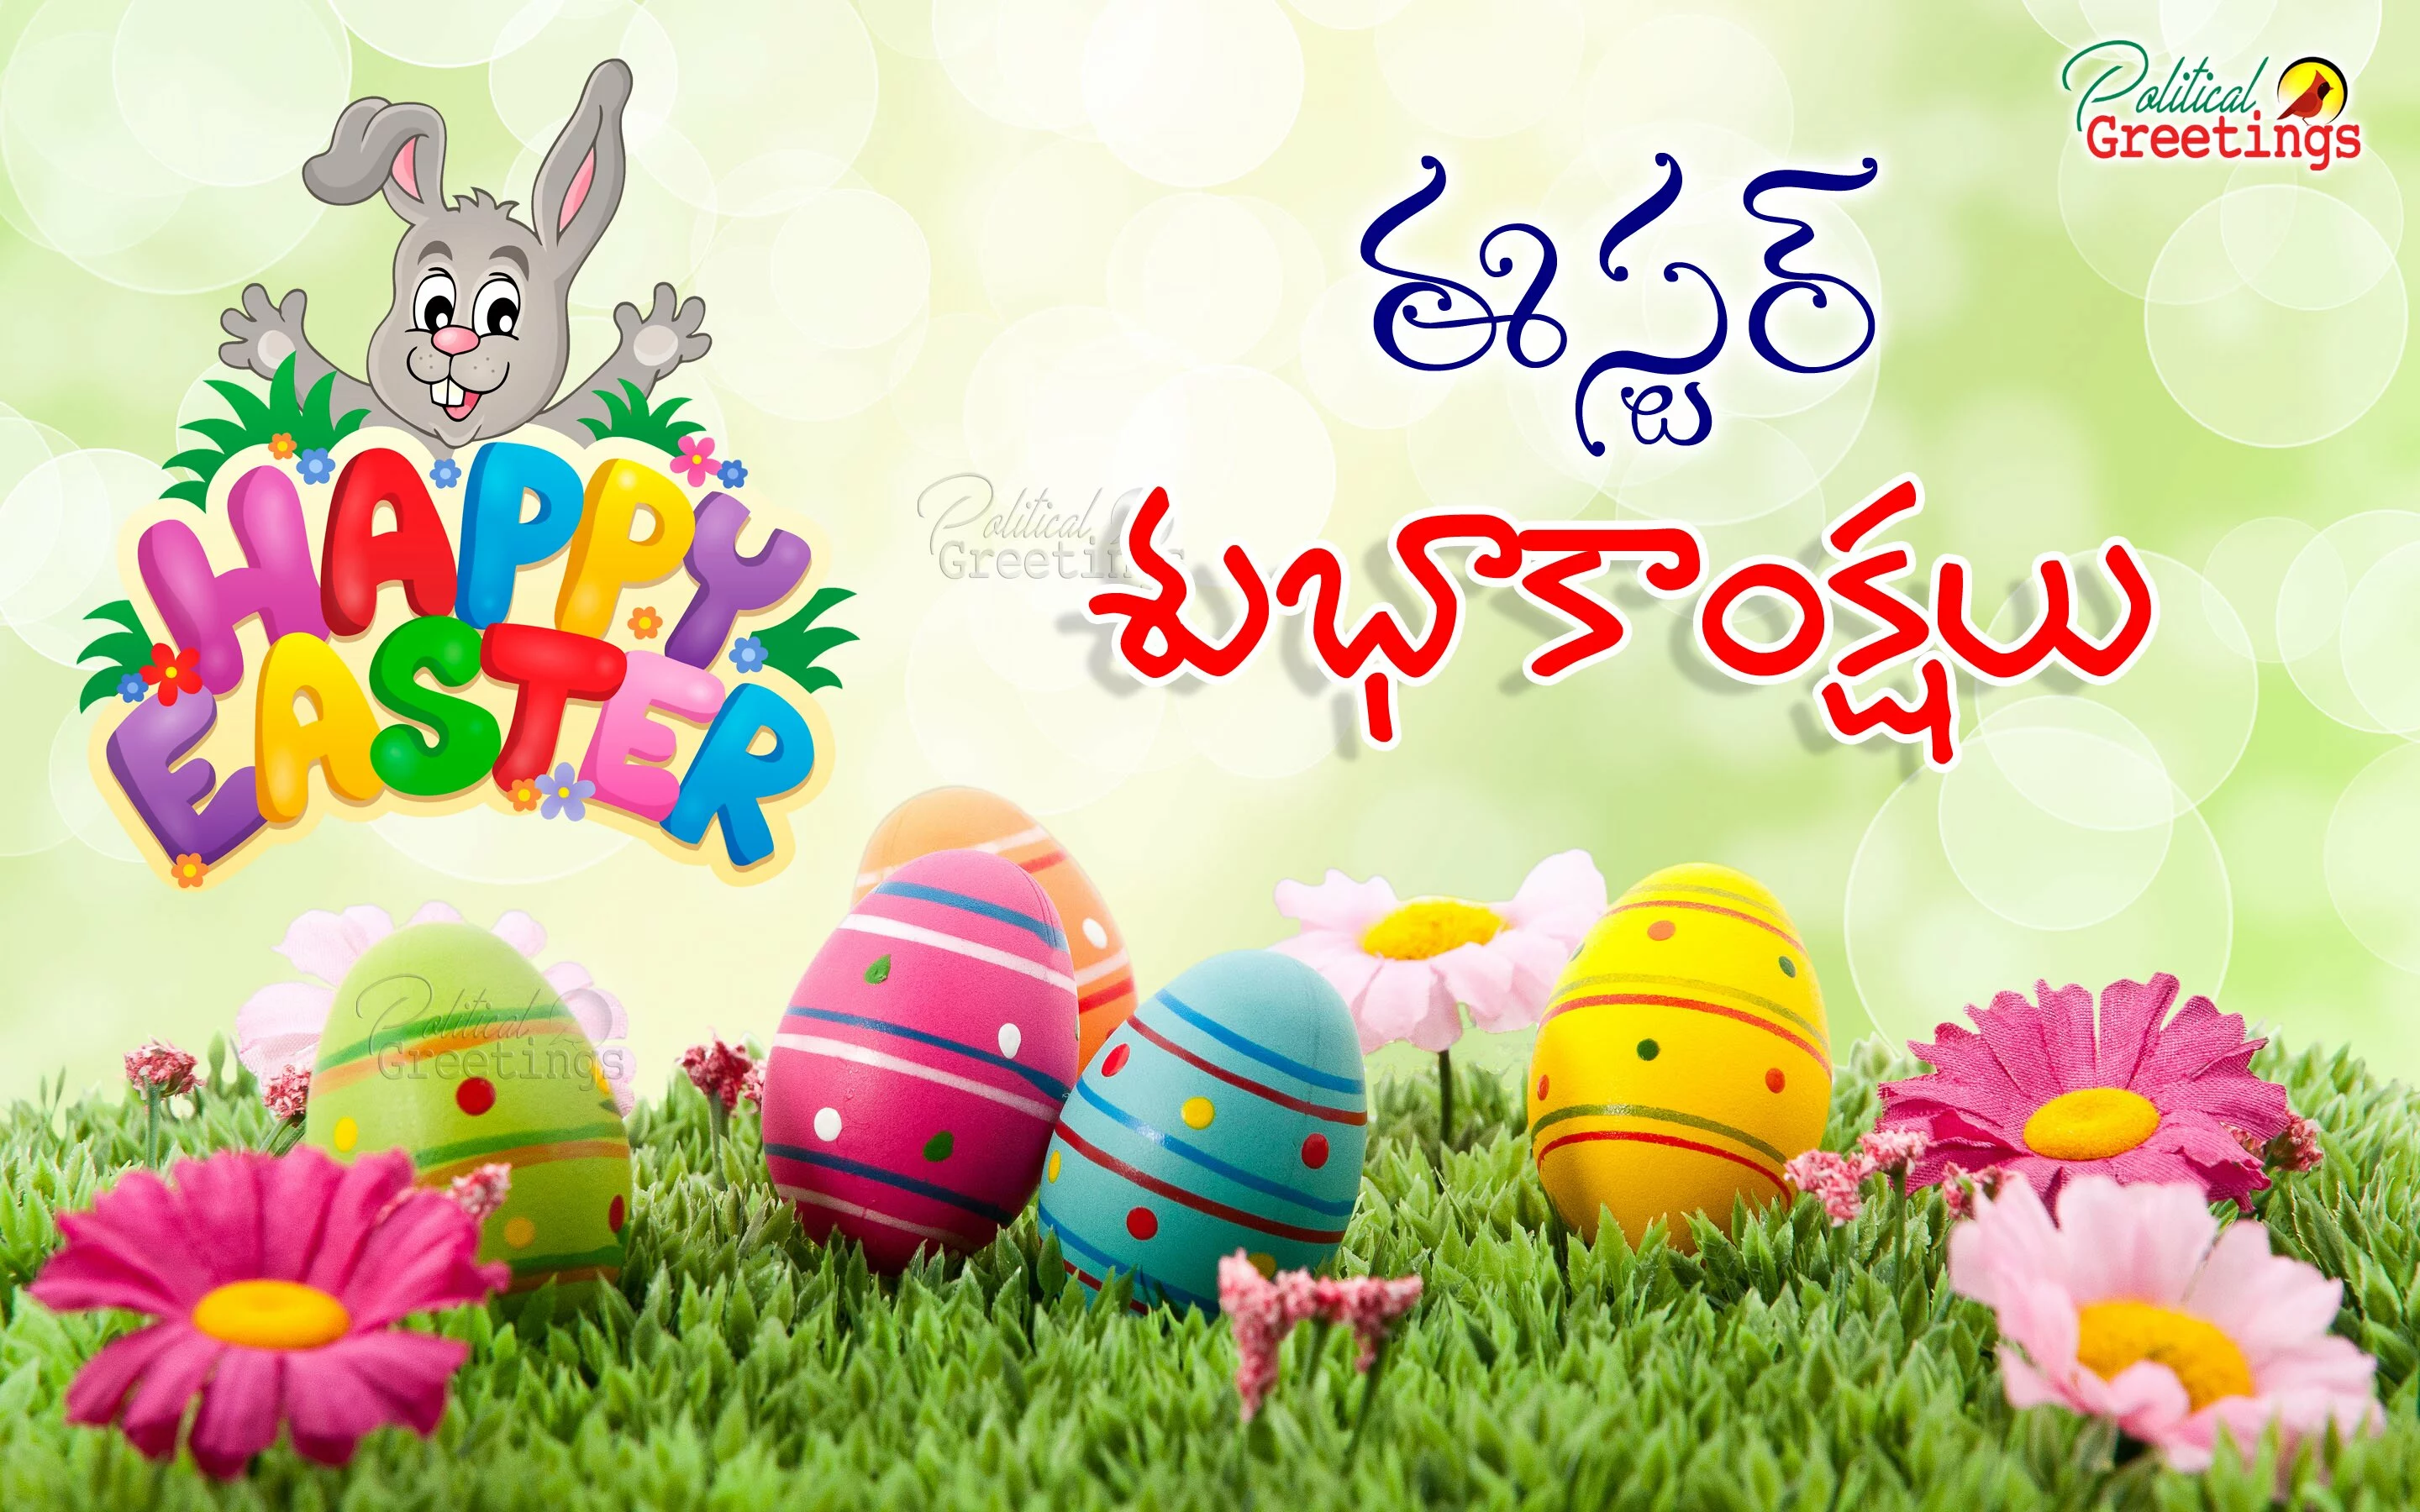 Easter Sunday telugu Quotes Greetings messages